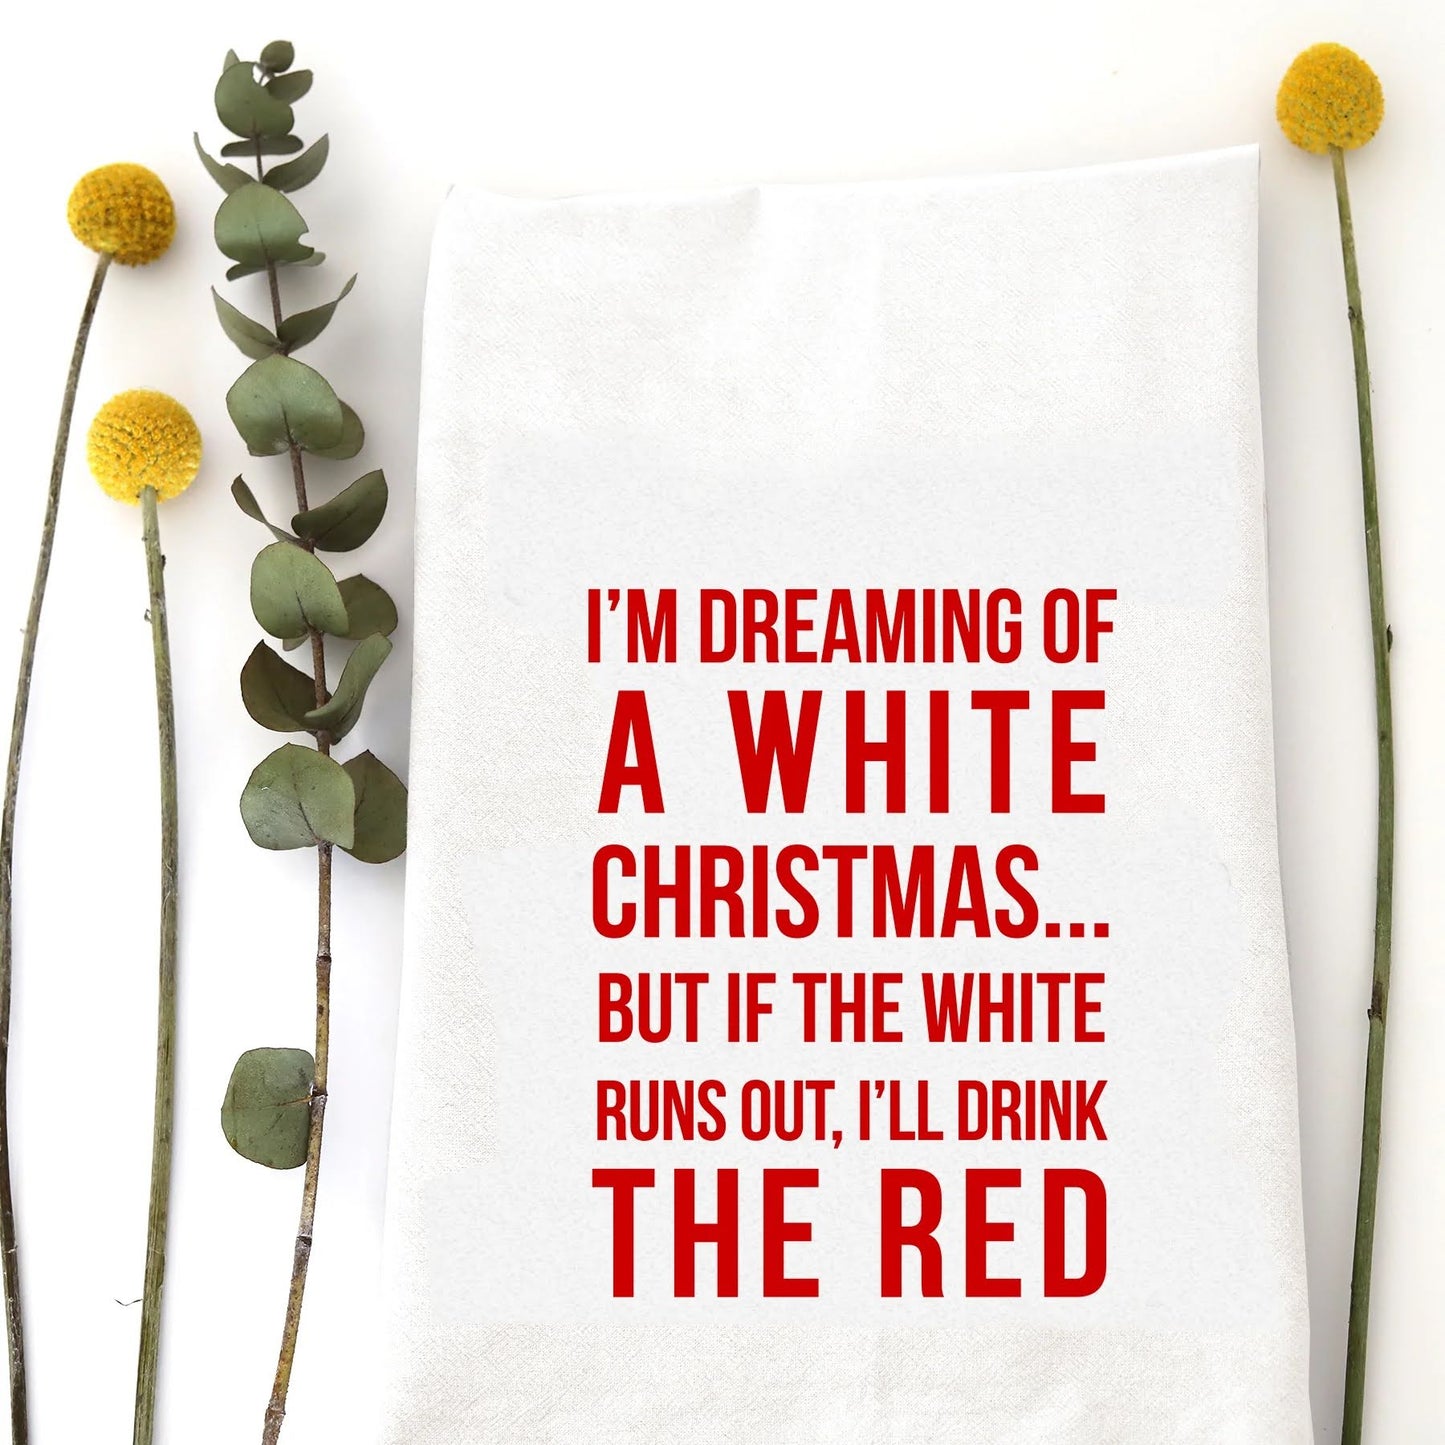 A holiday tea towel with the words "I'm dreaming of a white Christmas... but if the white runs out, I'll drink the red" printed on it.